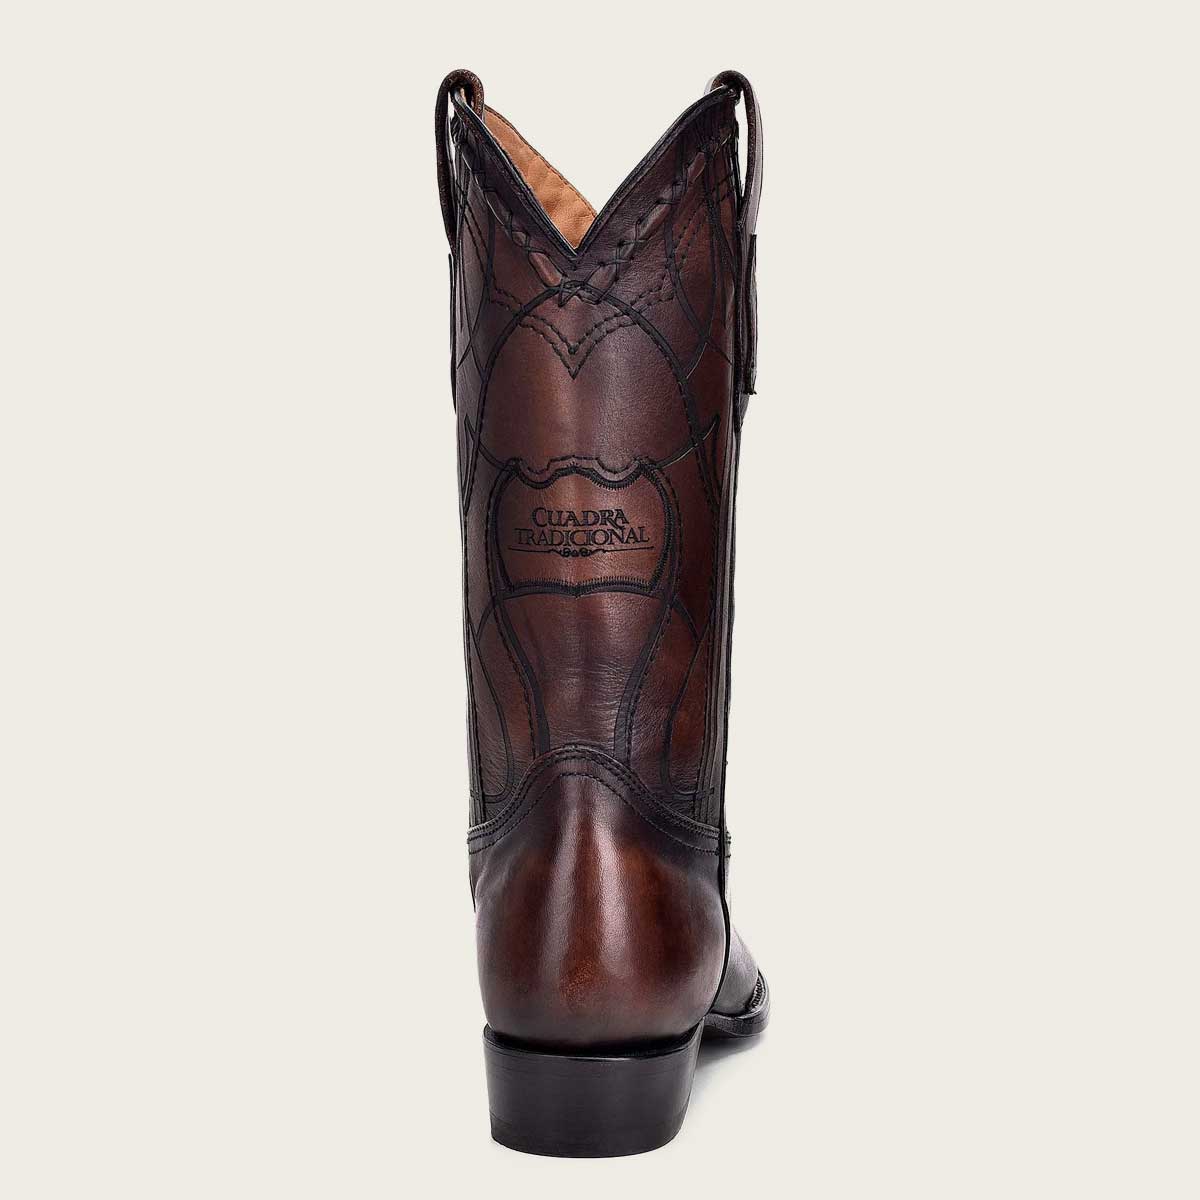 An intricately engraved brown leather western boot with pointed toe and stacked heel, perfect for a stylish and rustic look